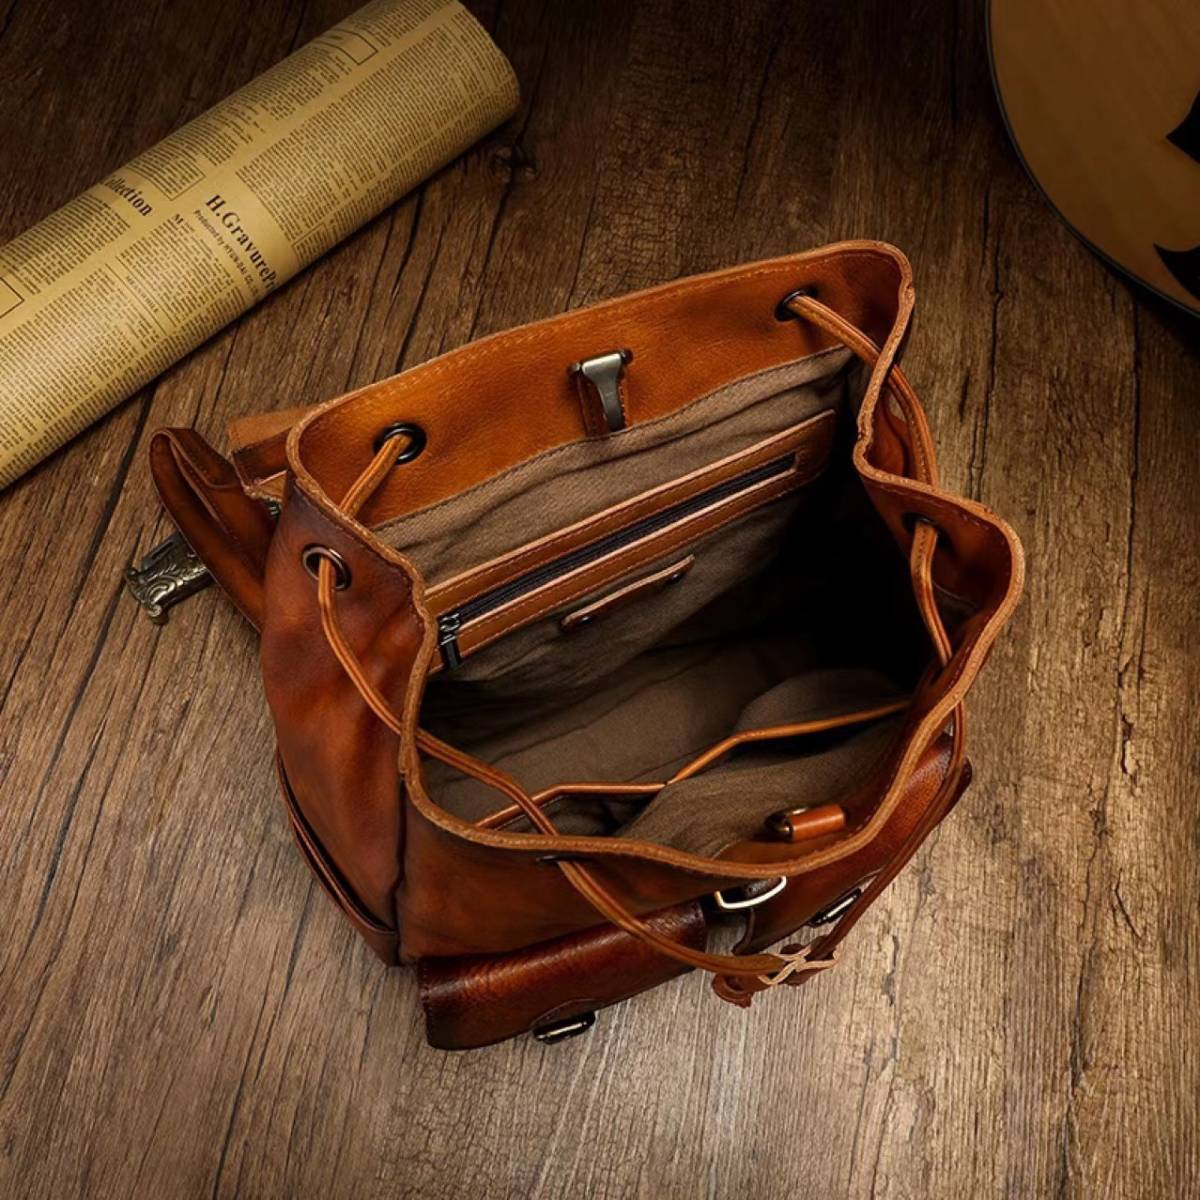  new arrival * handmade hand dyeing original leather men's bag rucksack 2way A4 correspondence 12.5 -inch iPad business rucksack cow leather commuting going to school 